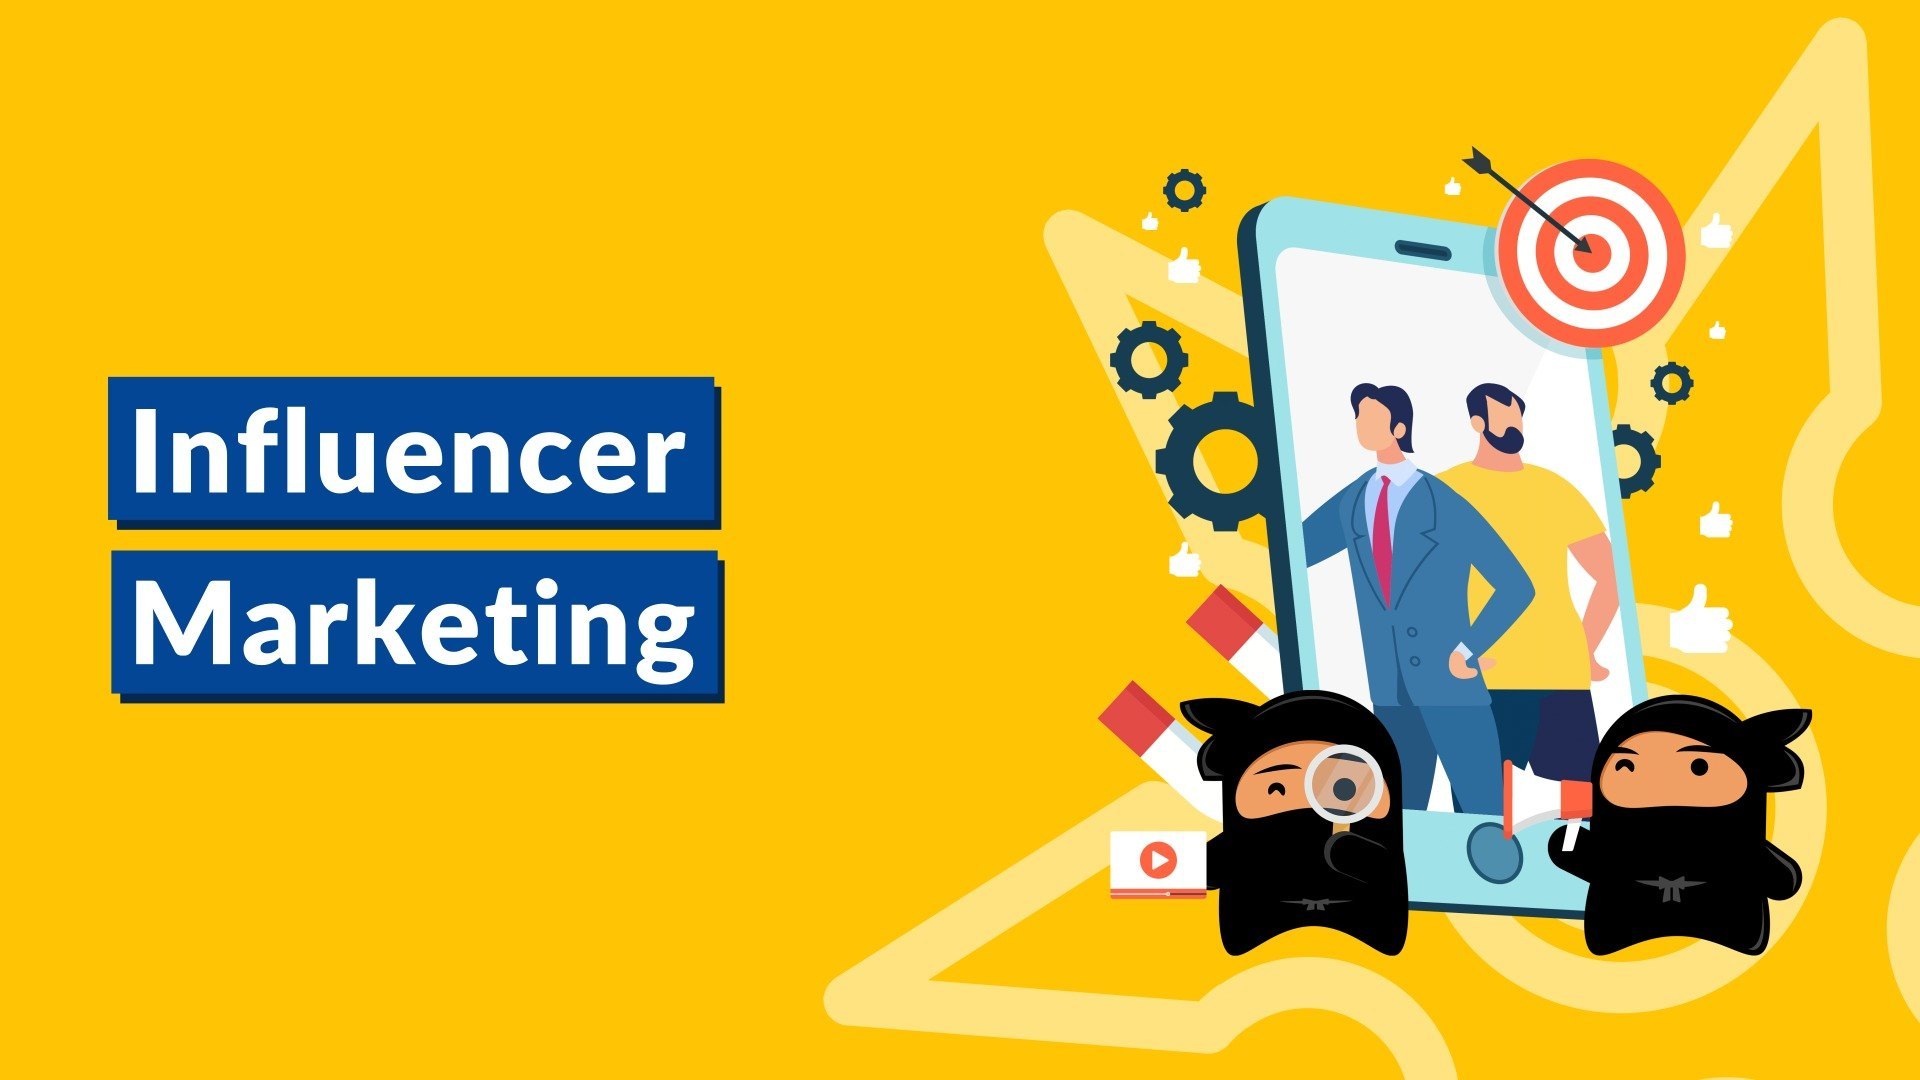 influencer promotion companies in noida, influencer marketing companies in noida, influencer promotion companies, influencer marketing companies, influencer marketing, digital marketing, brandezza